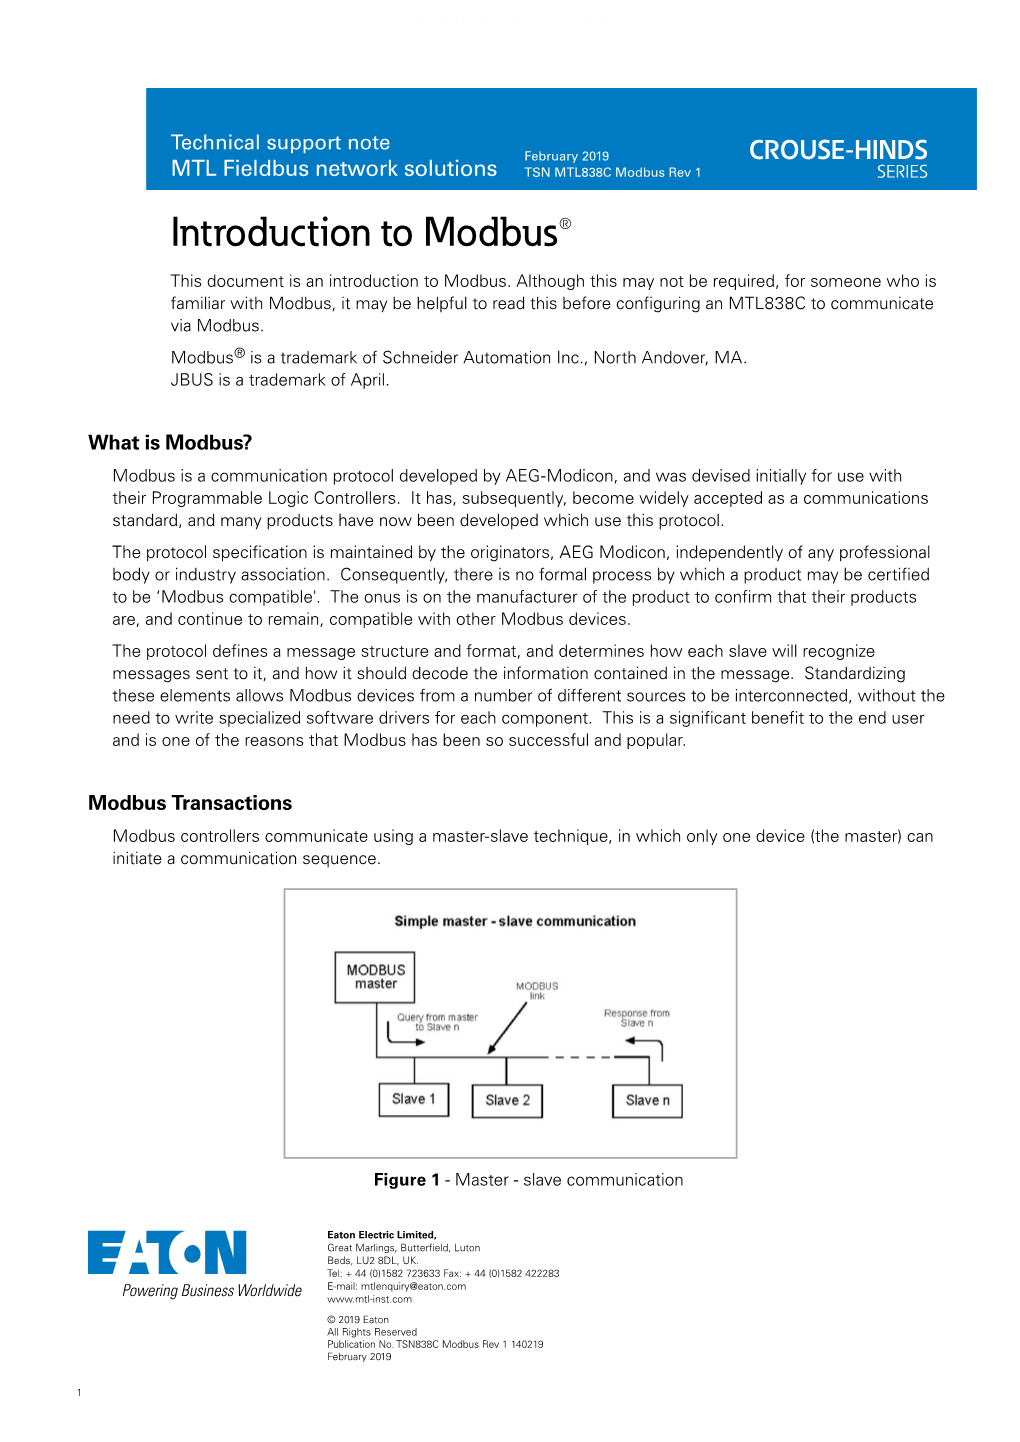 Introduction to Modbus®